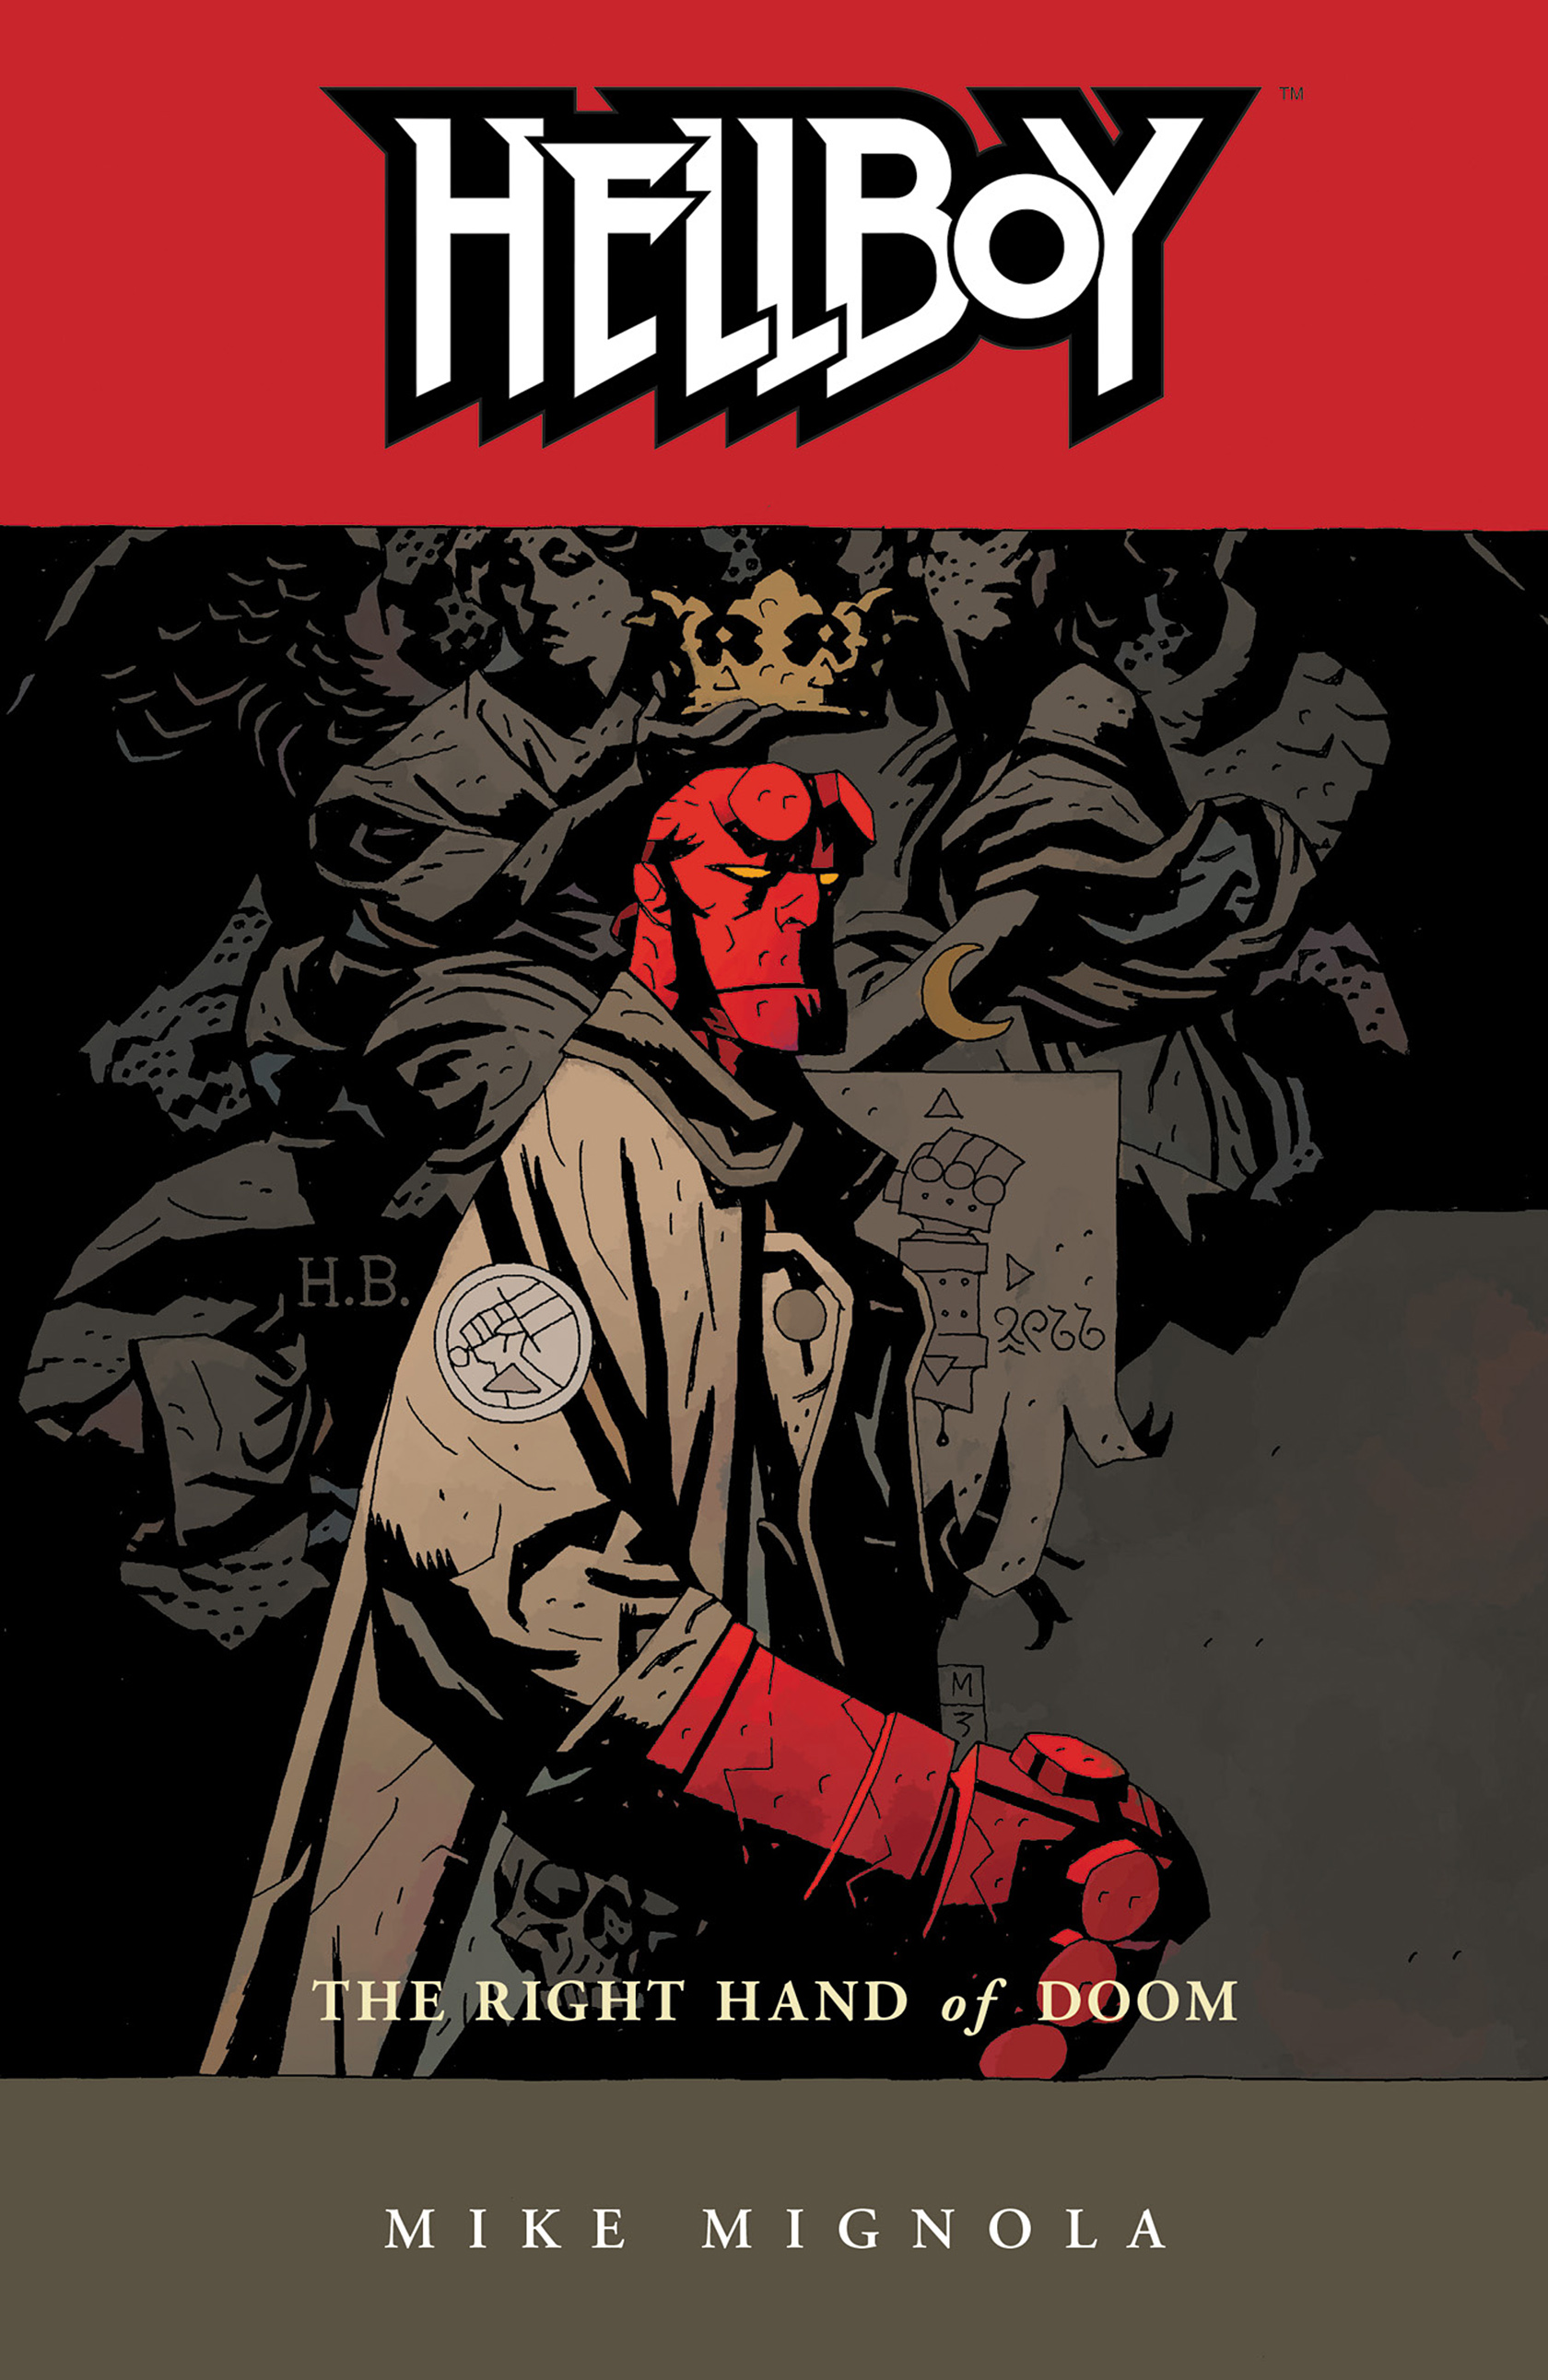 Read online Hellboy: The Right Hand of Doom comic -  Issue # TPB - 1